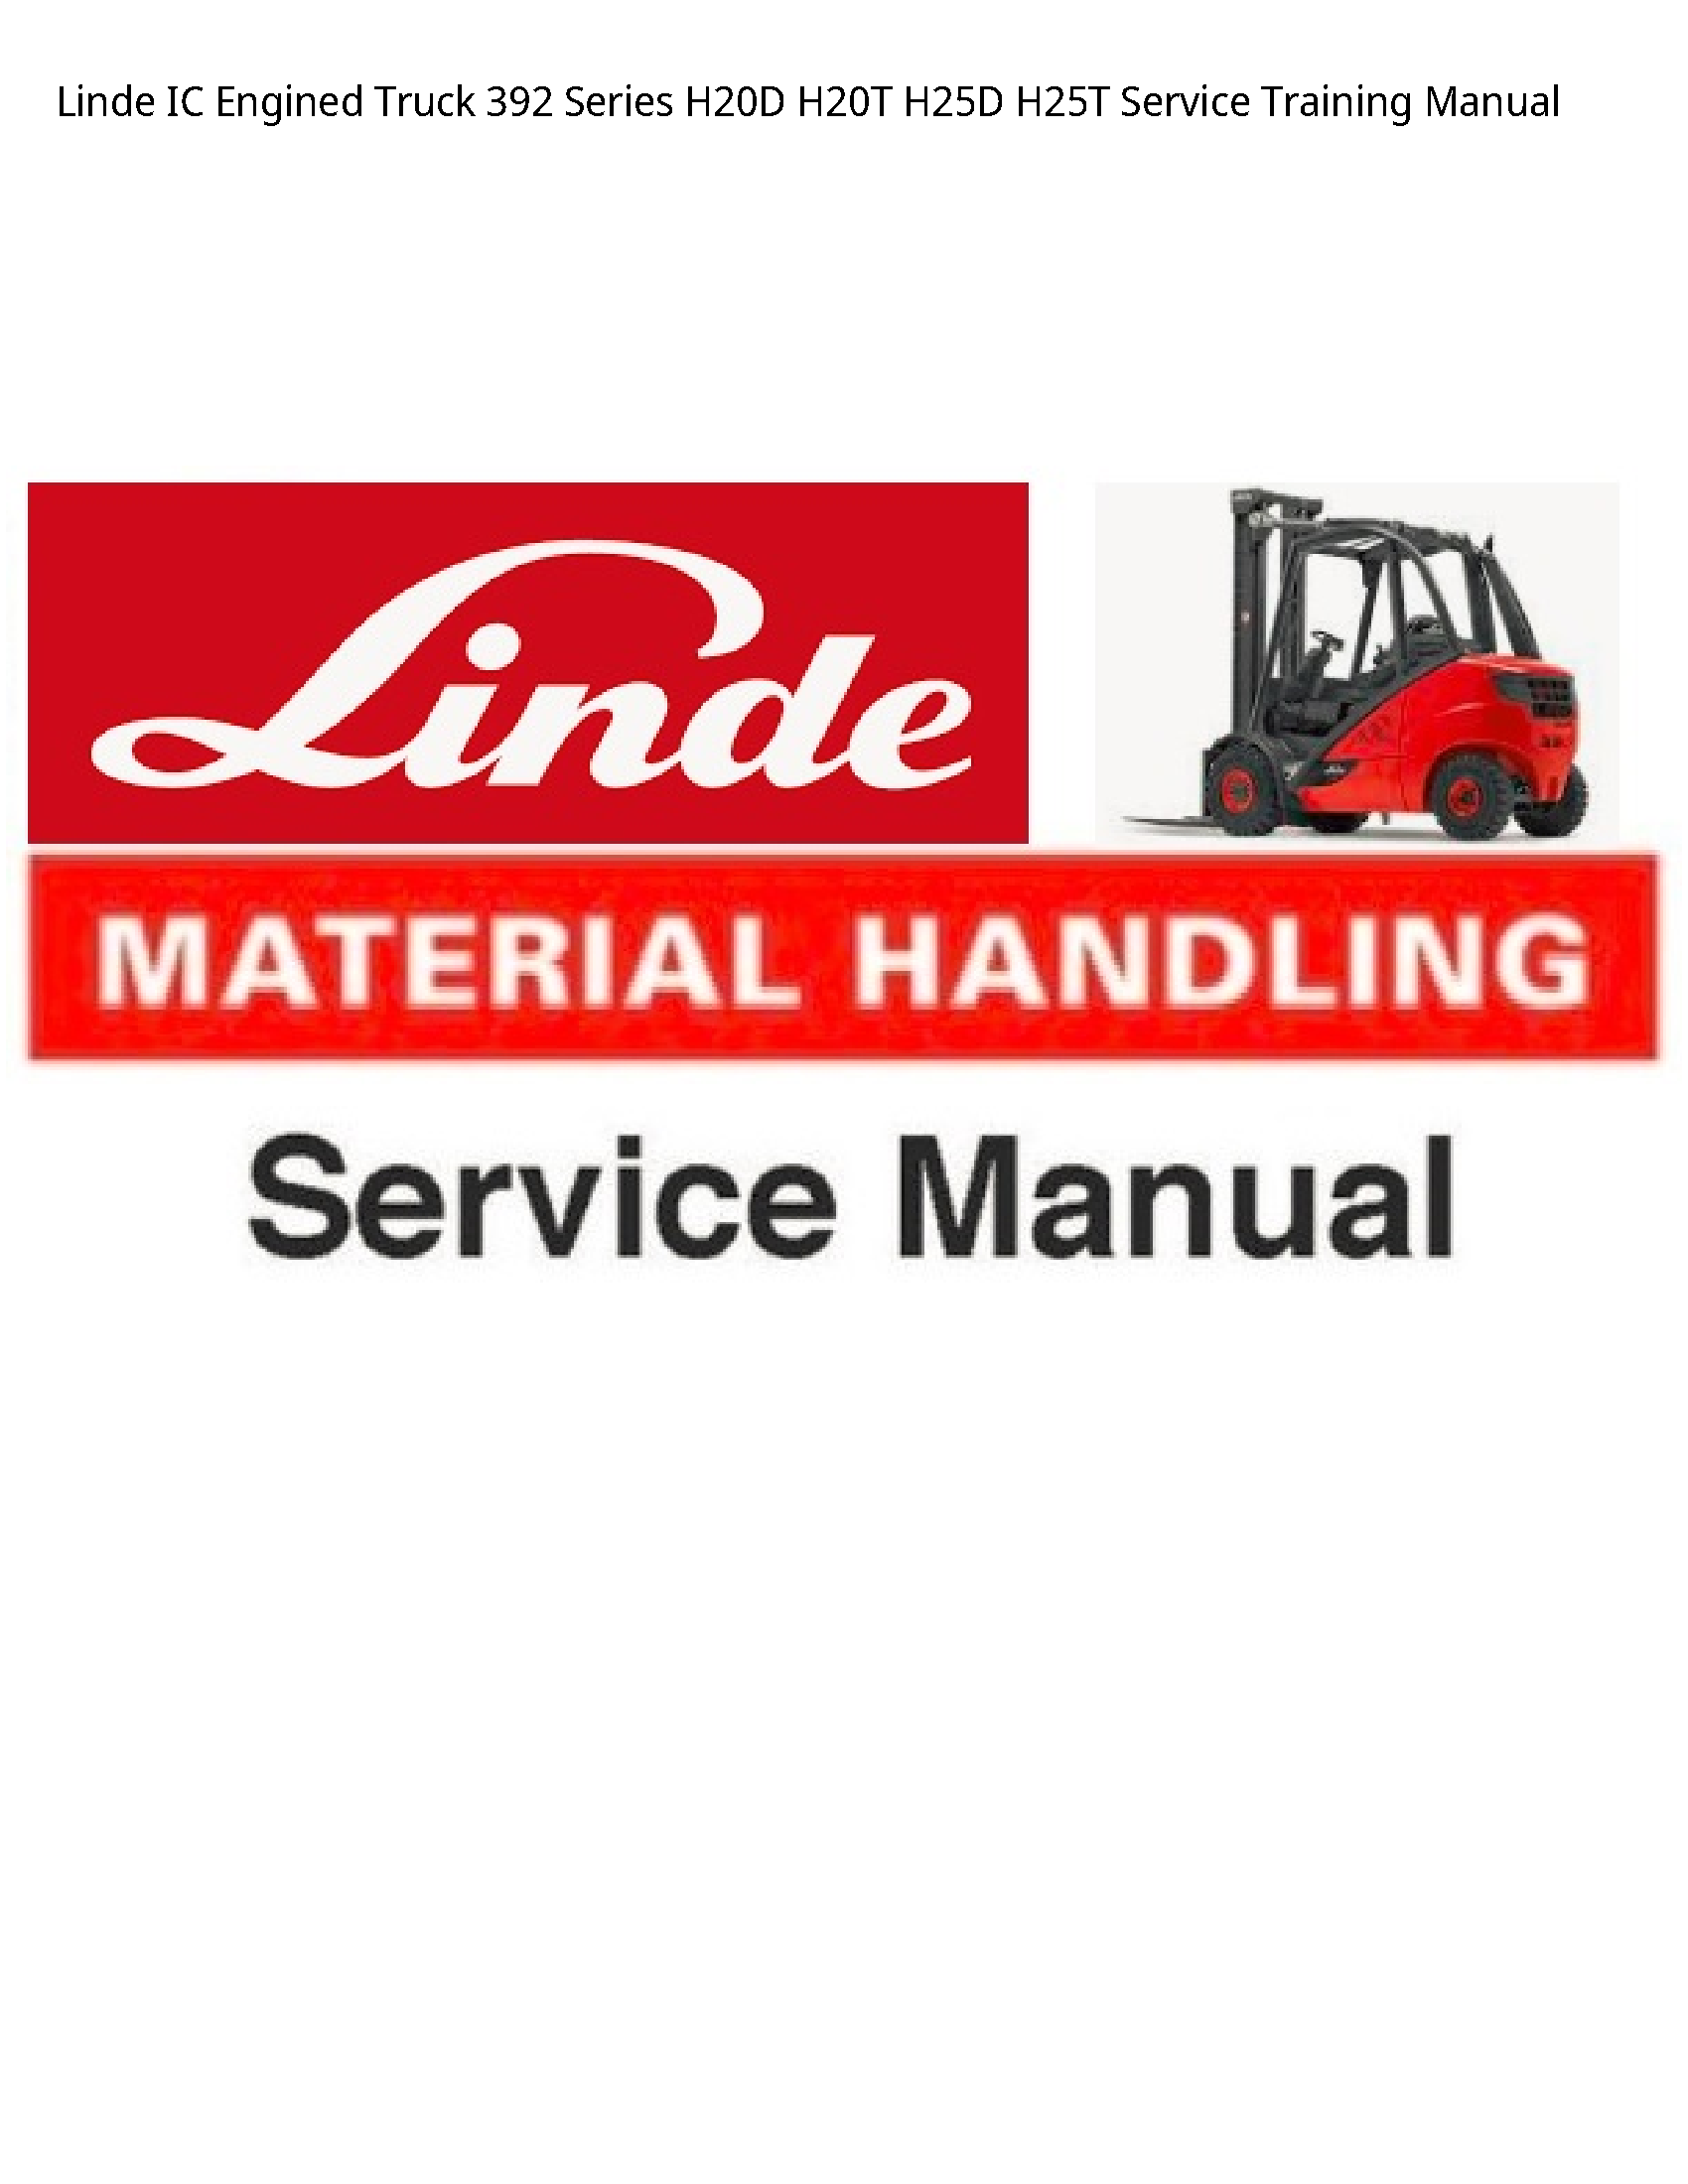 Linde 392 IC Engined Truck Series Service Training manual